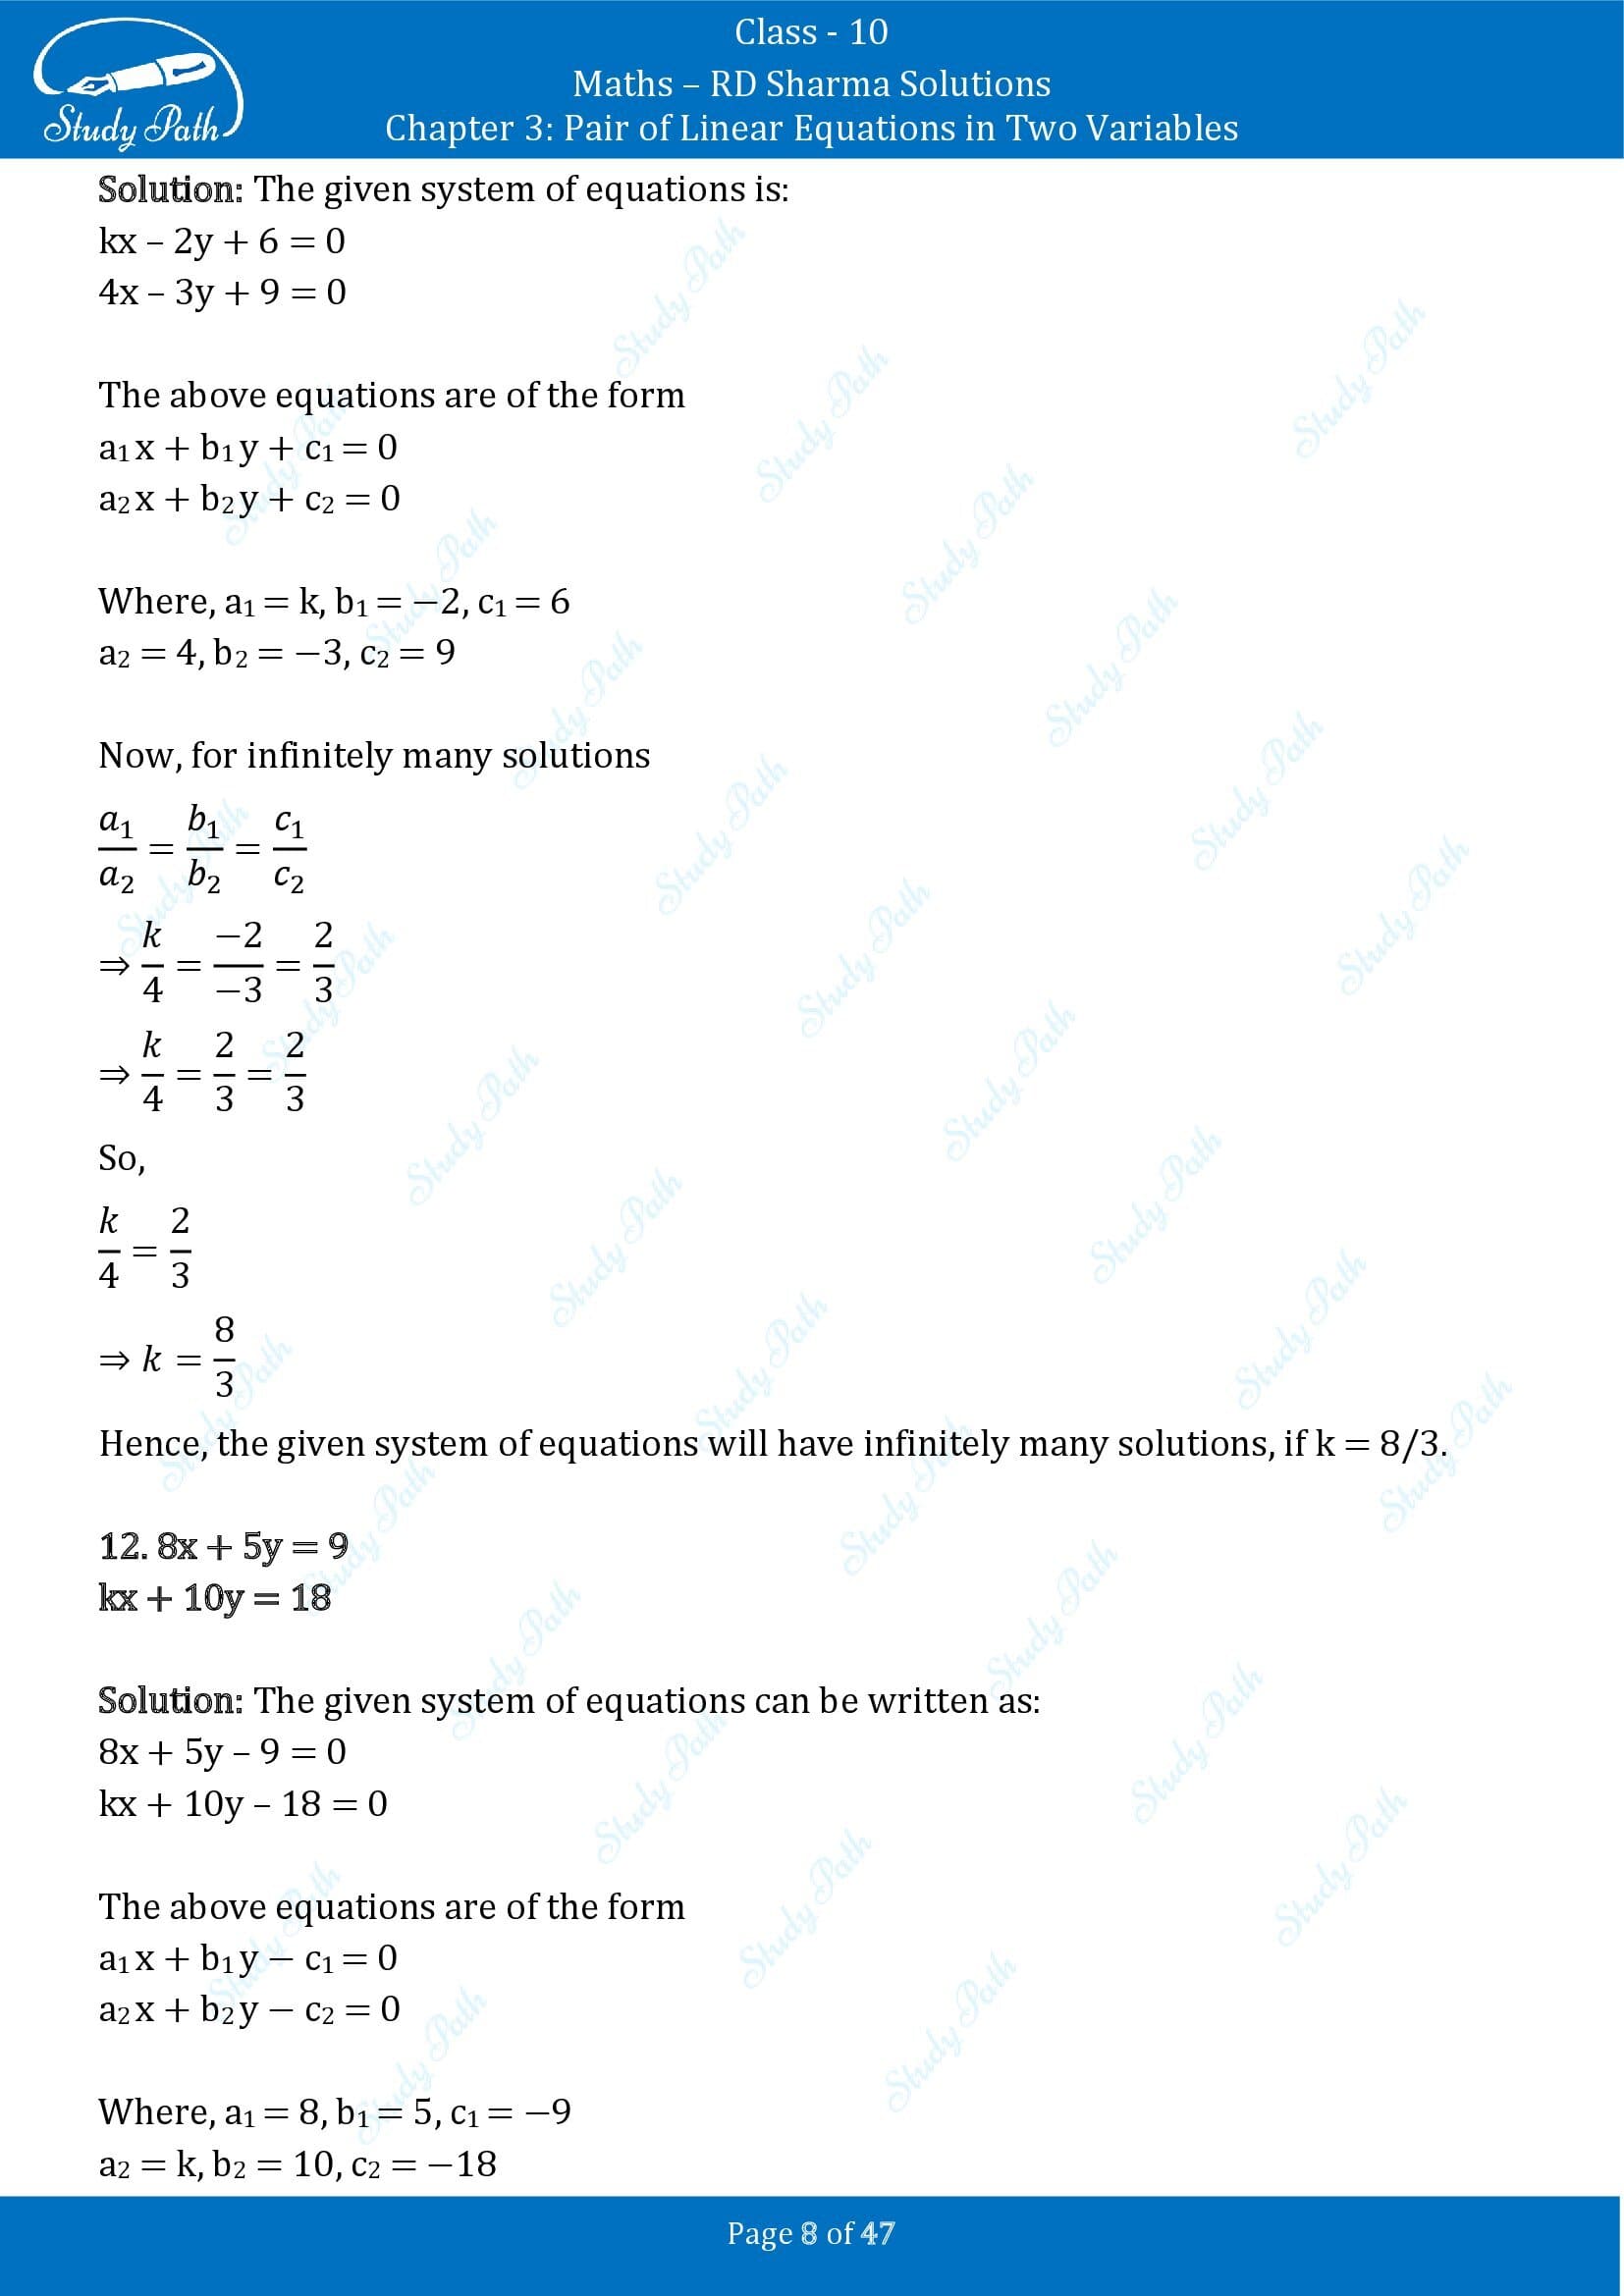 RD Sharma Solutions Class 10 Chapter 3 Pair of Linear Equations in Two Variables Exercise 3.5 00008